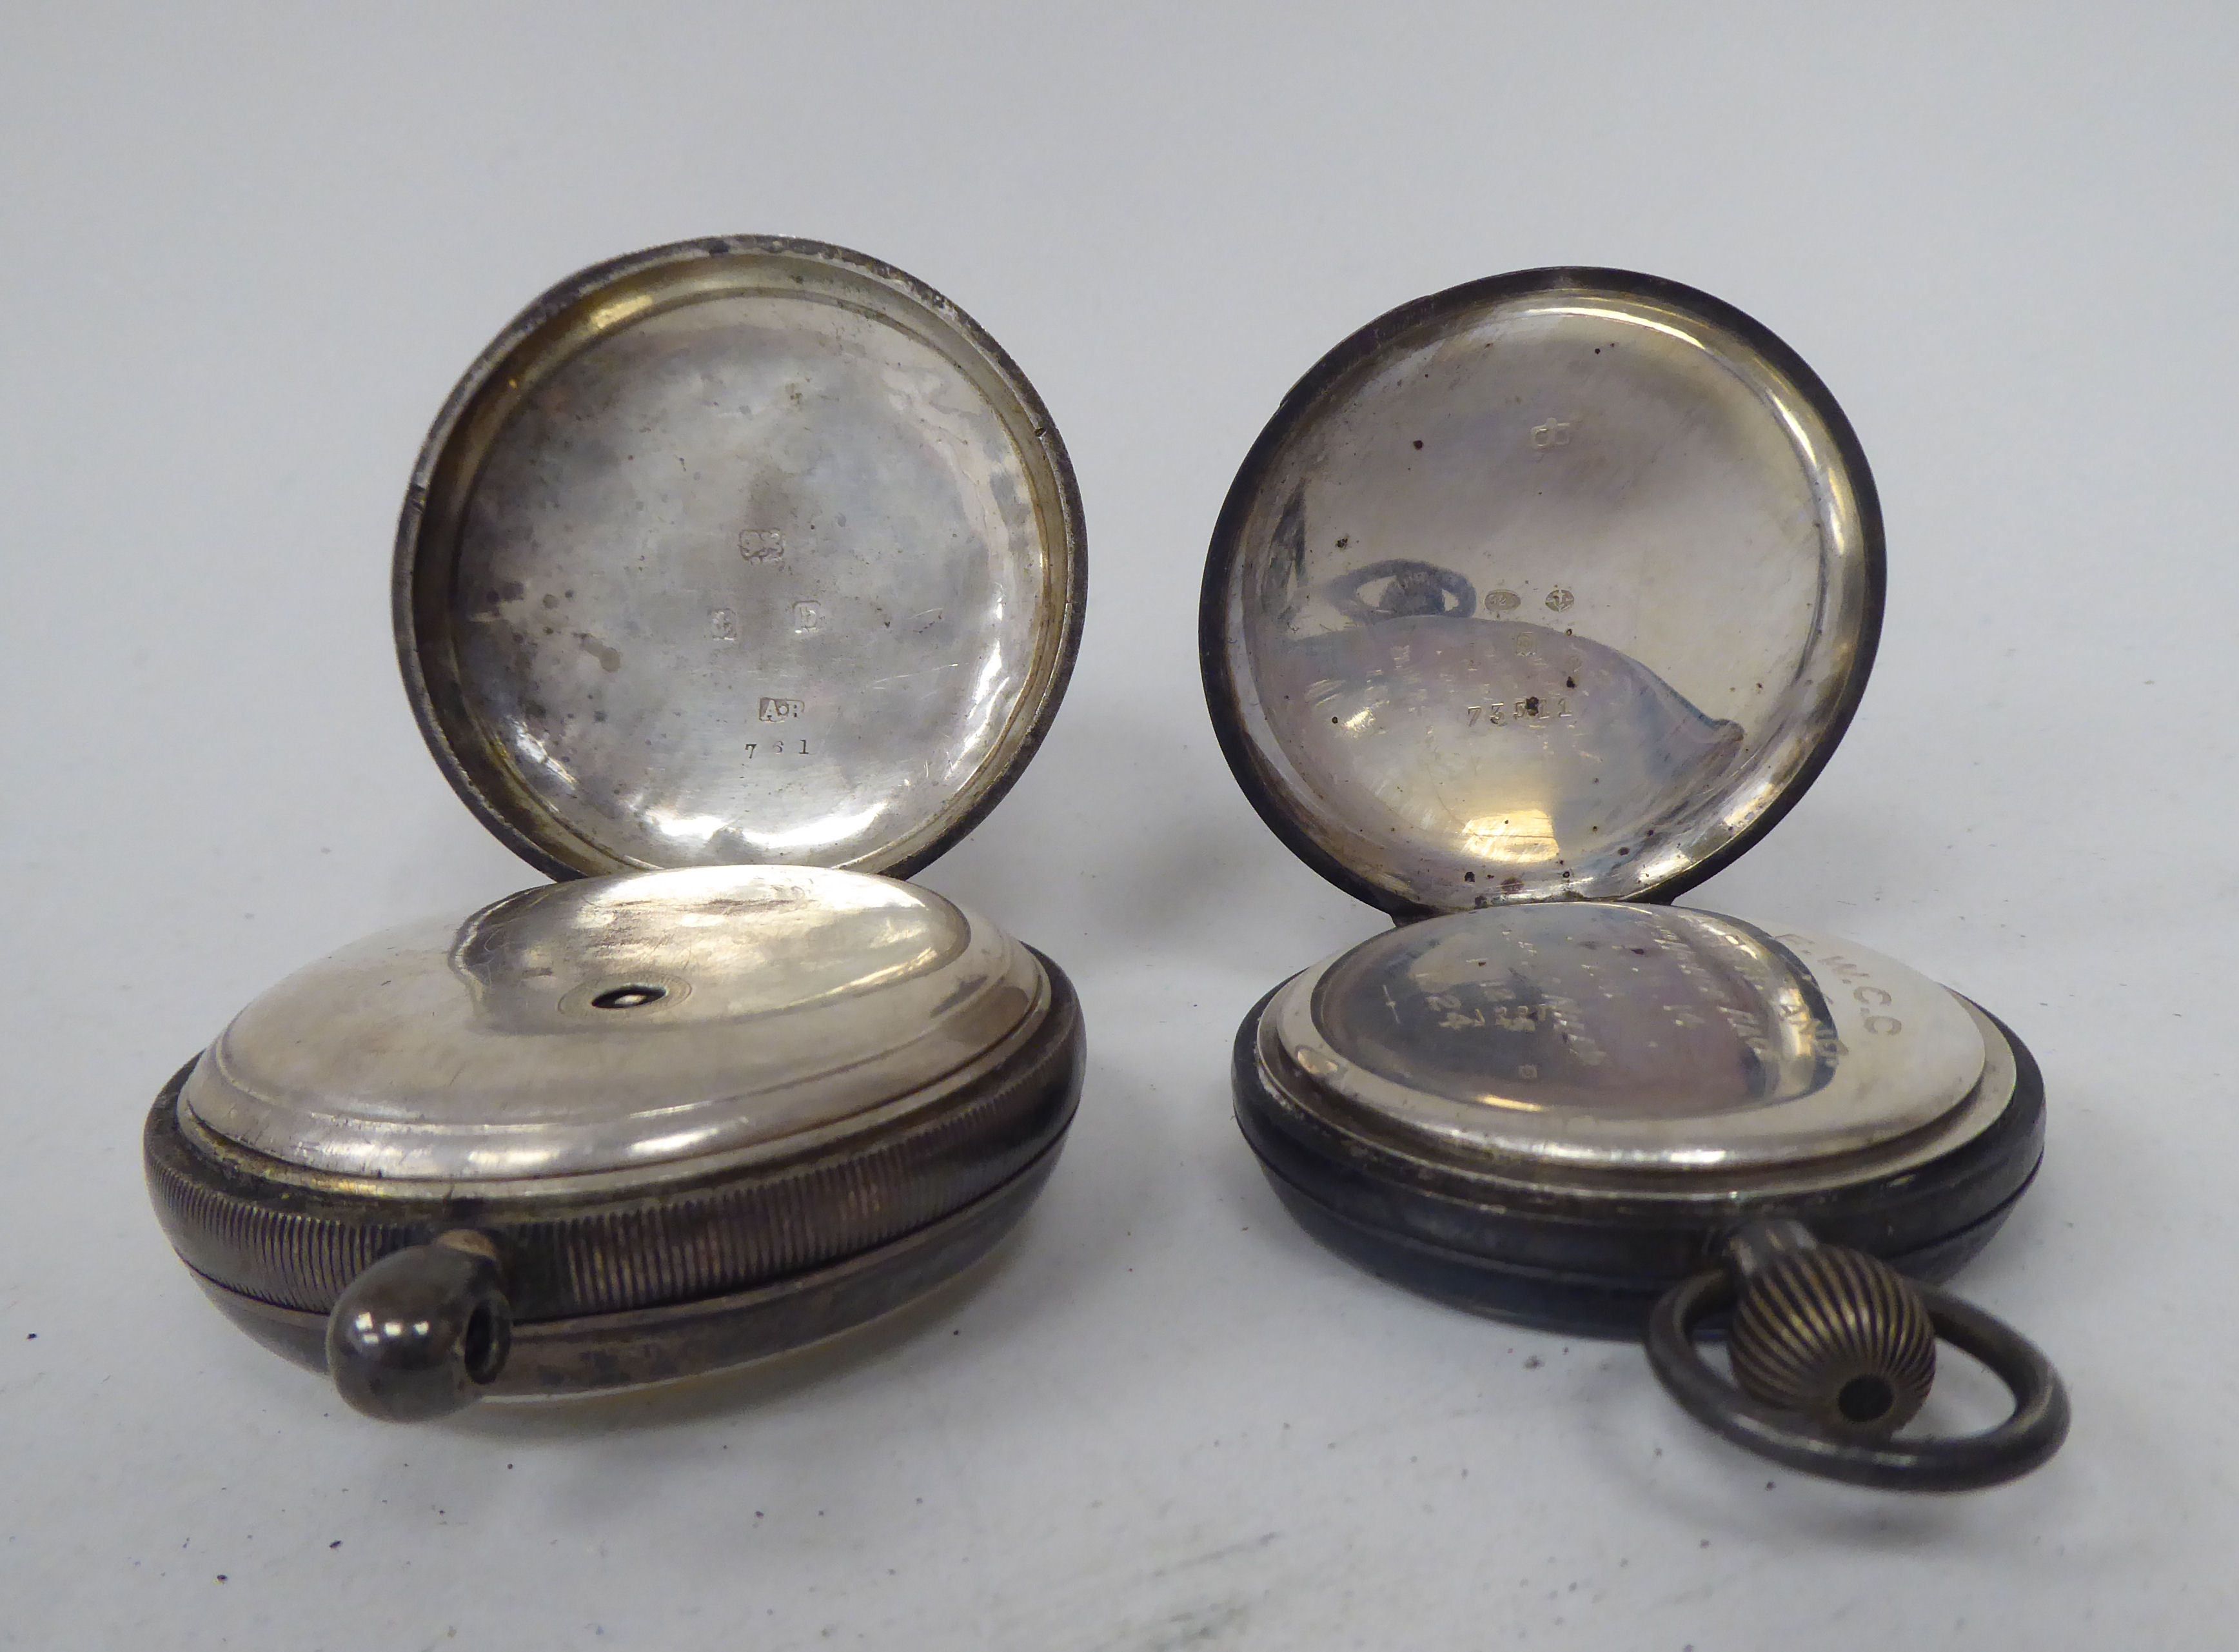 A Waltham silver cased pocketwatch, faced by a Roman dial; and another, faced by an Arabic dial - Image 4 of 6